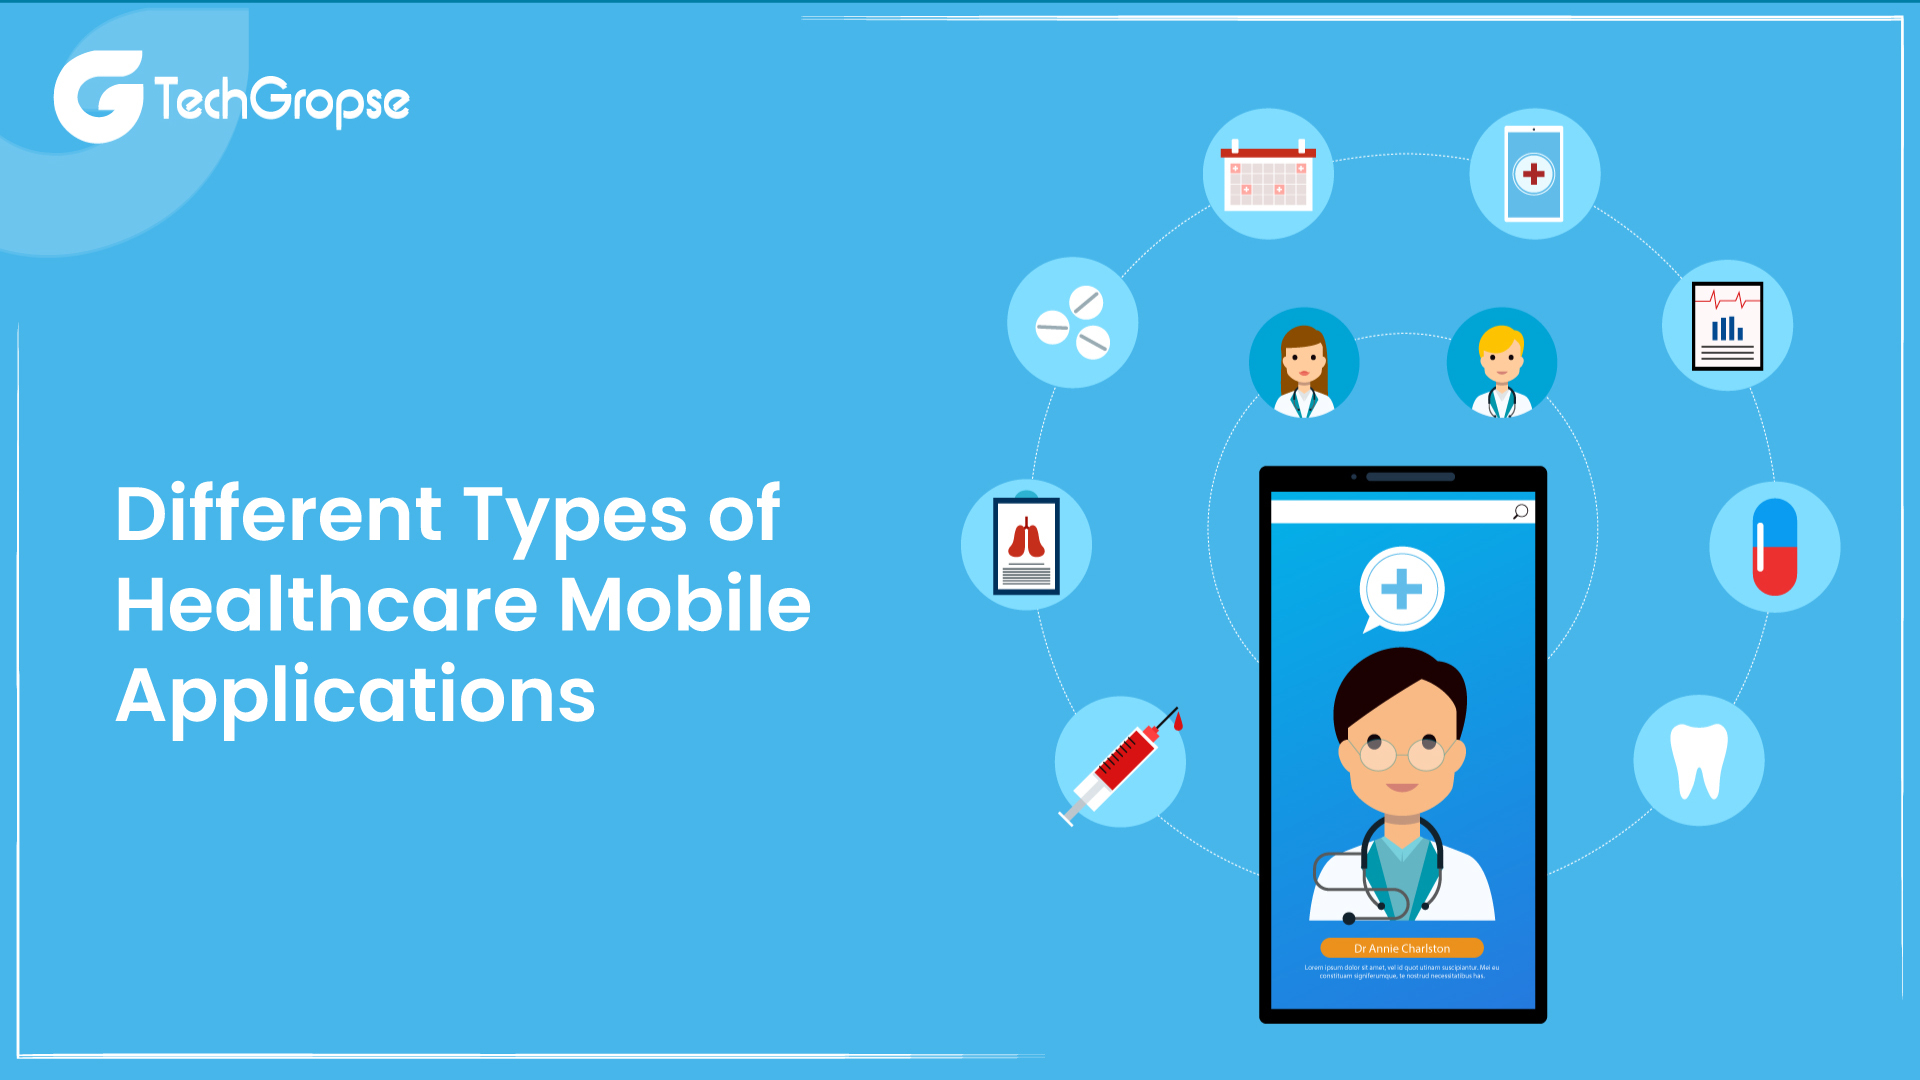 Different Types of Healthcare Mobile Applications